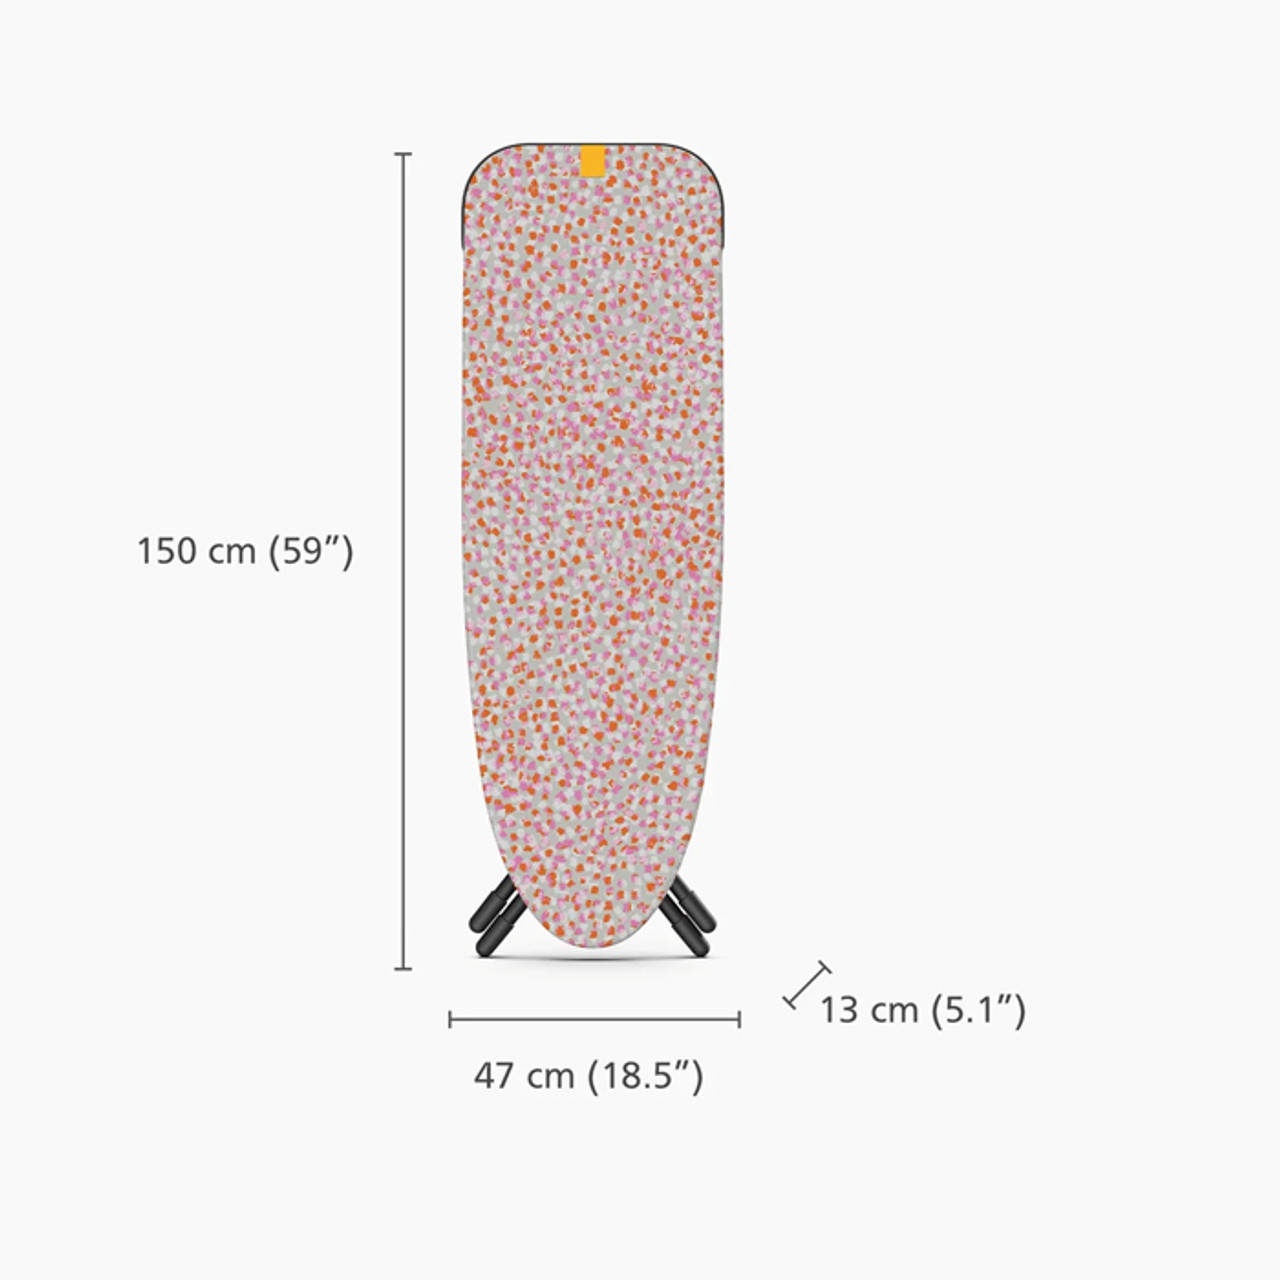 Glide Max 135cm Peach Easy-store Ironing Board *in-store